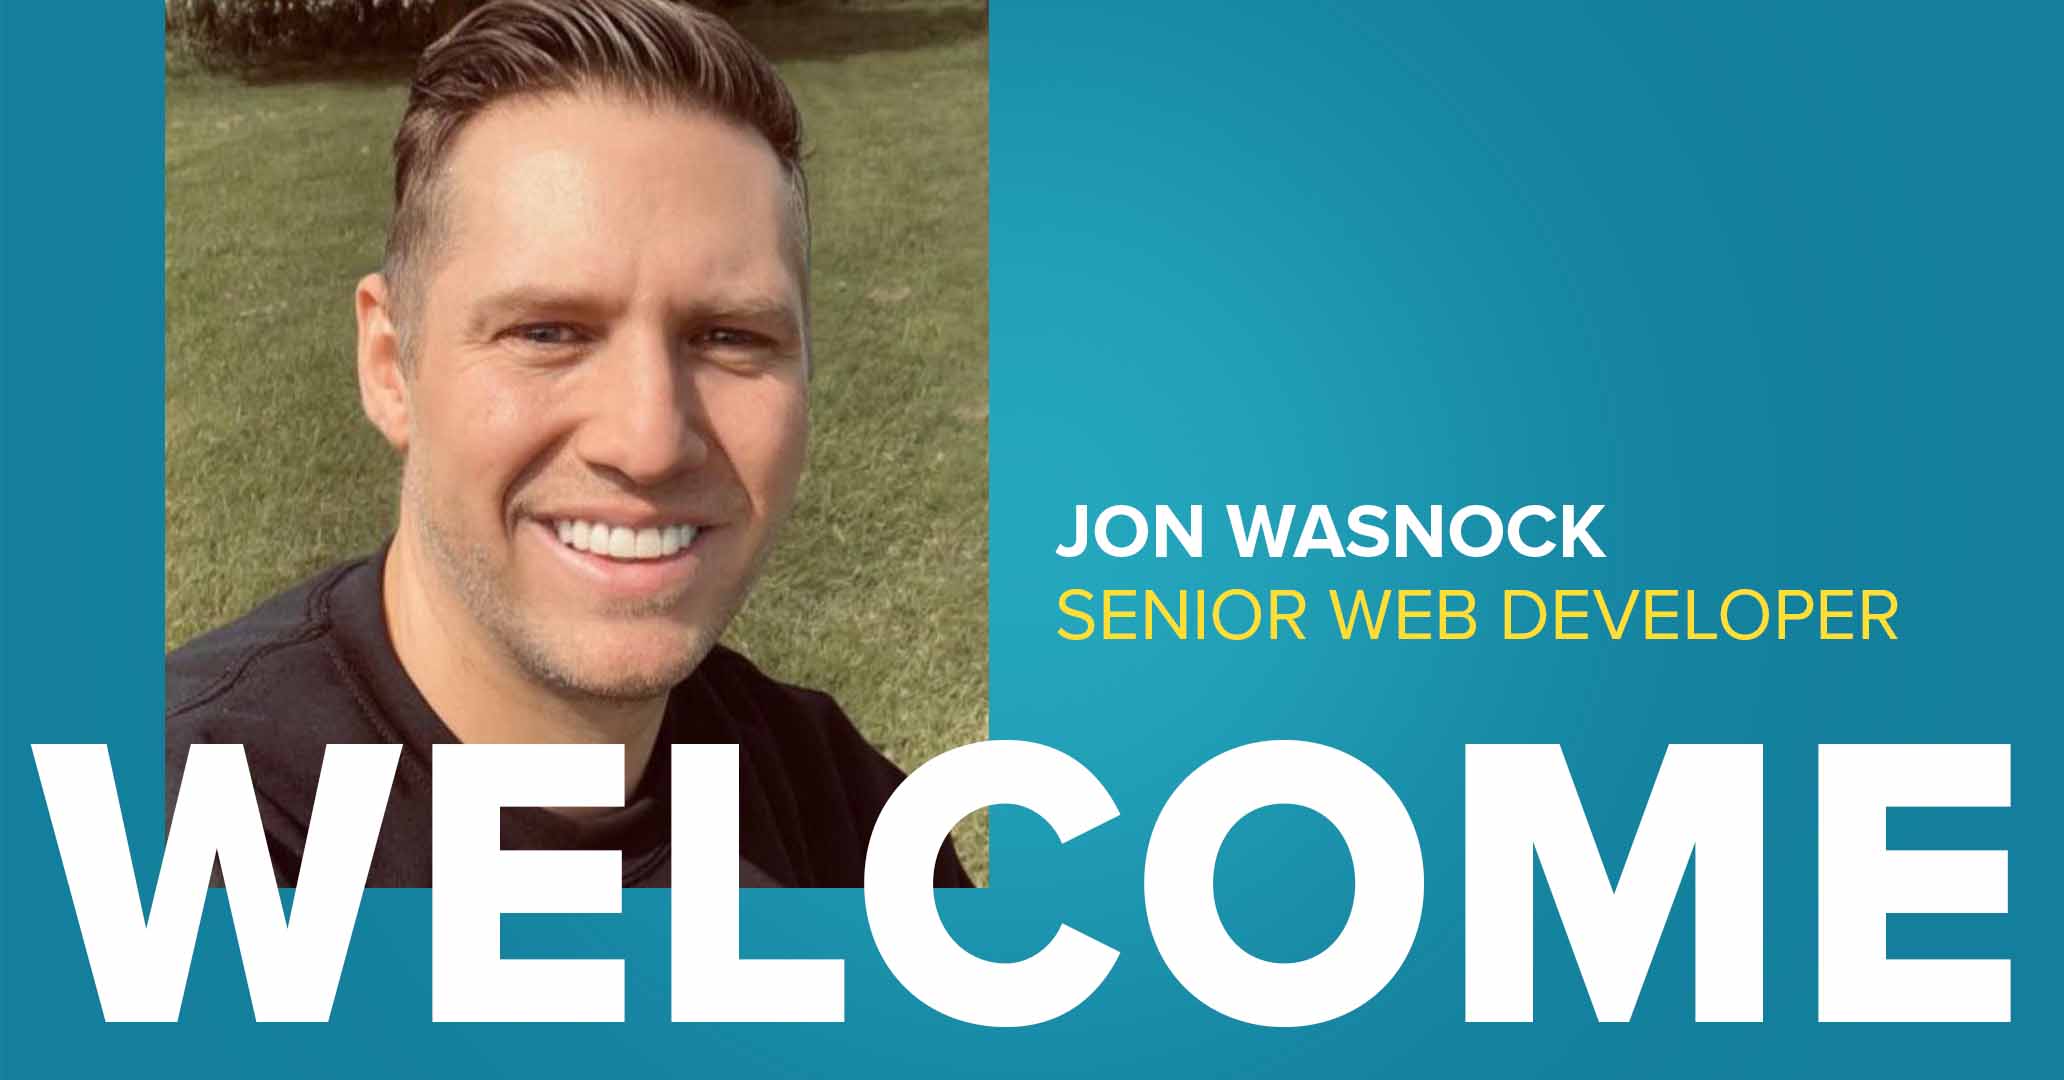 We’ve expanded our team some more – Welcome Jon.